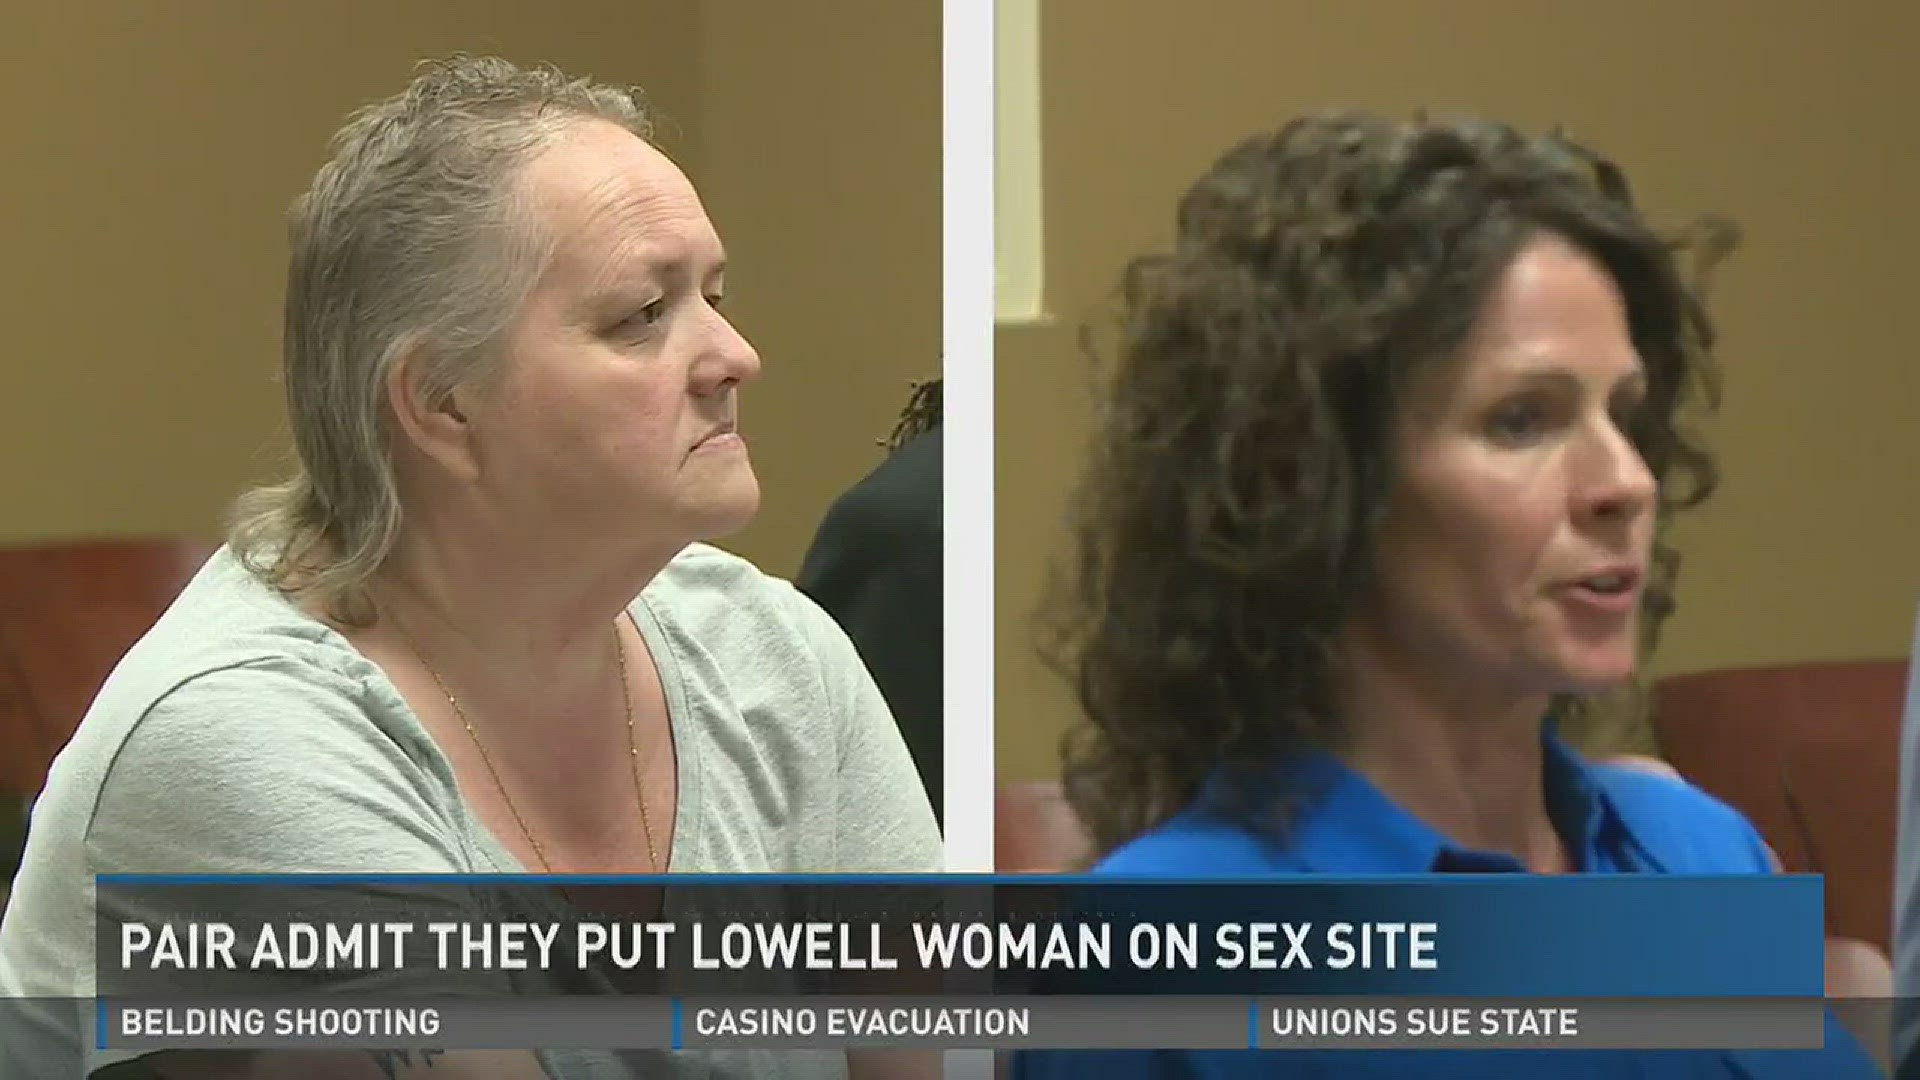 Sending strange men to Lowell mothers home for sex brings pleas wzzm13 image